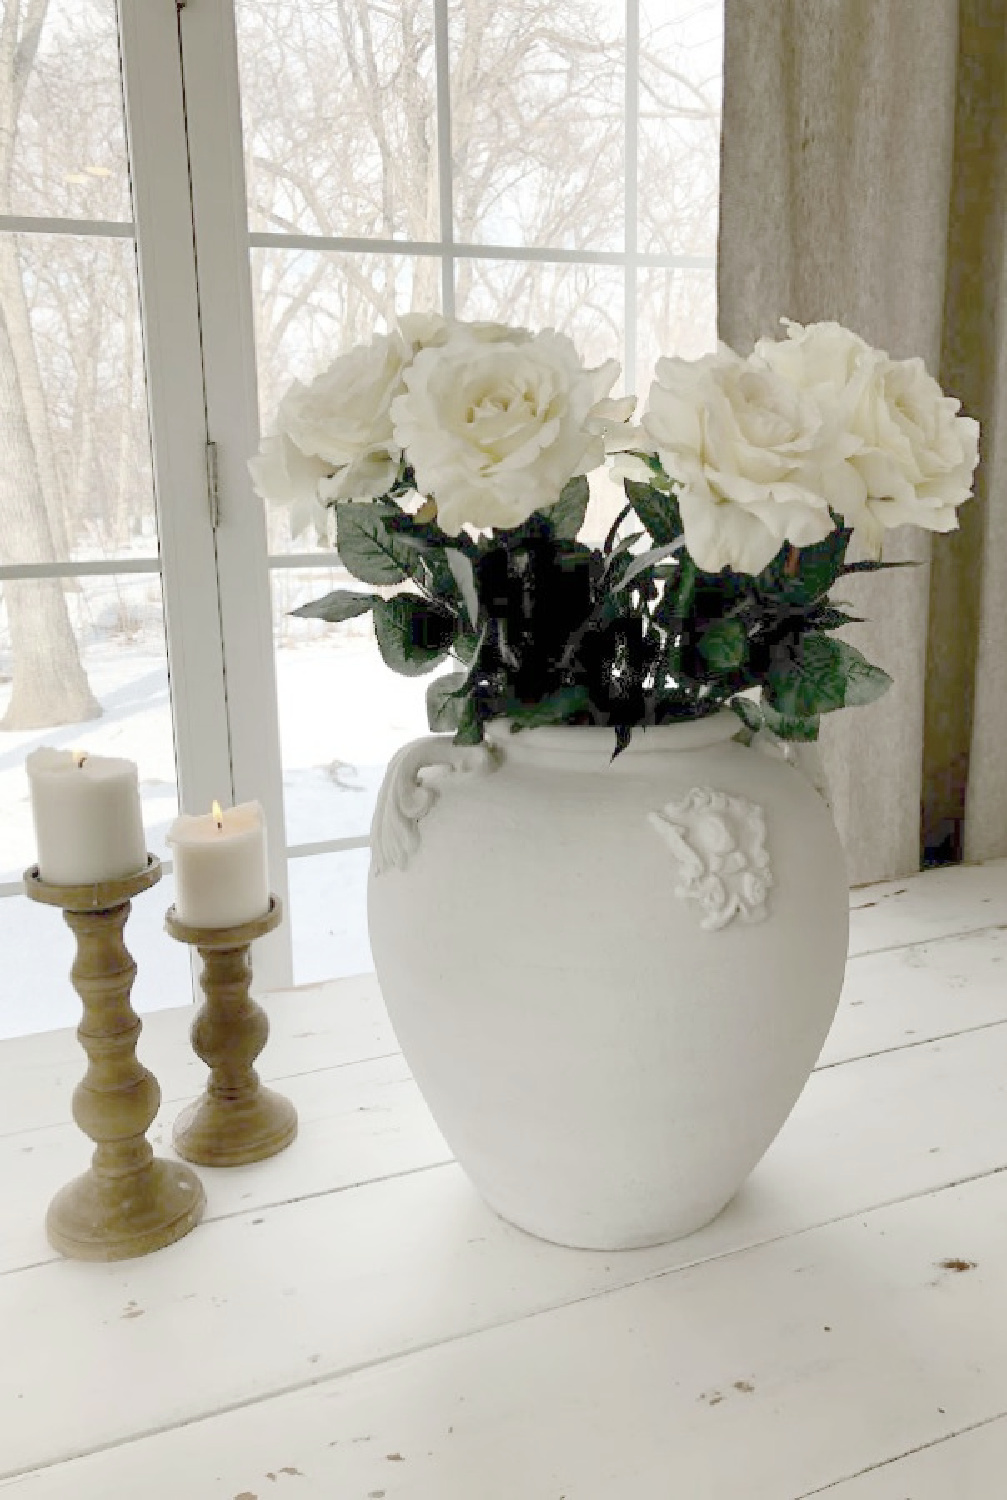 Terracotta urn with white roses on my antique farm table - Hello Lovely.